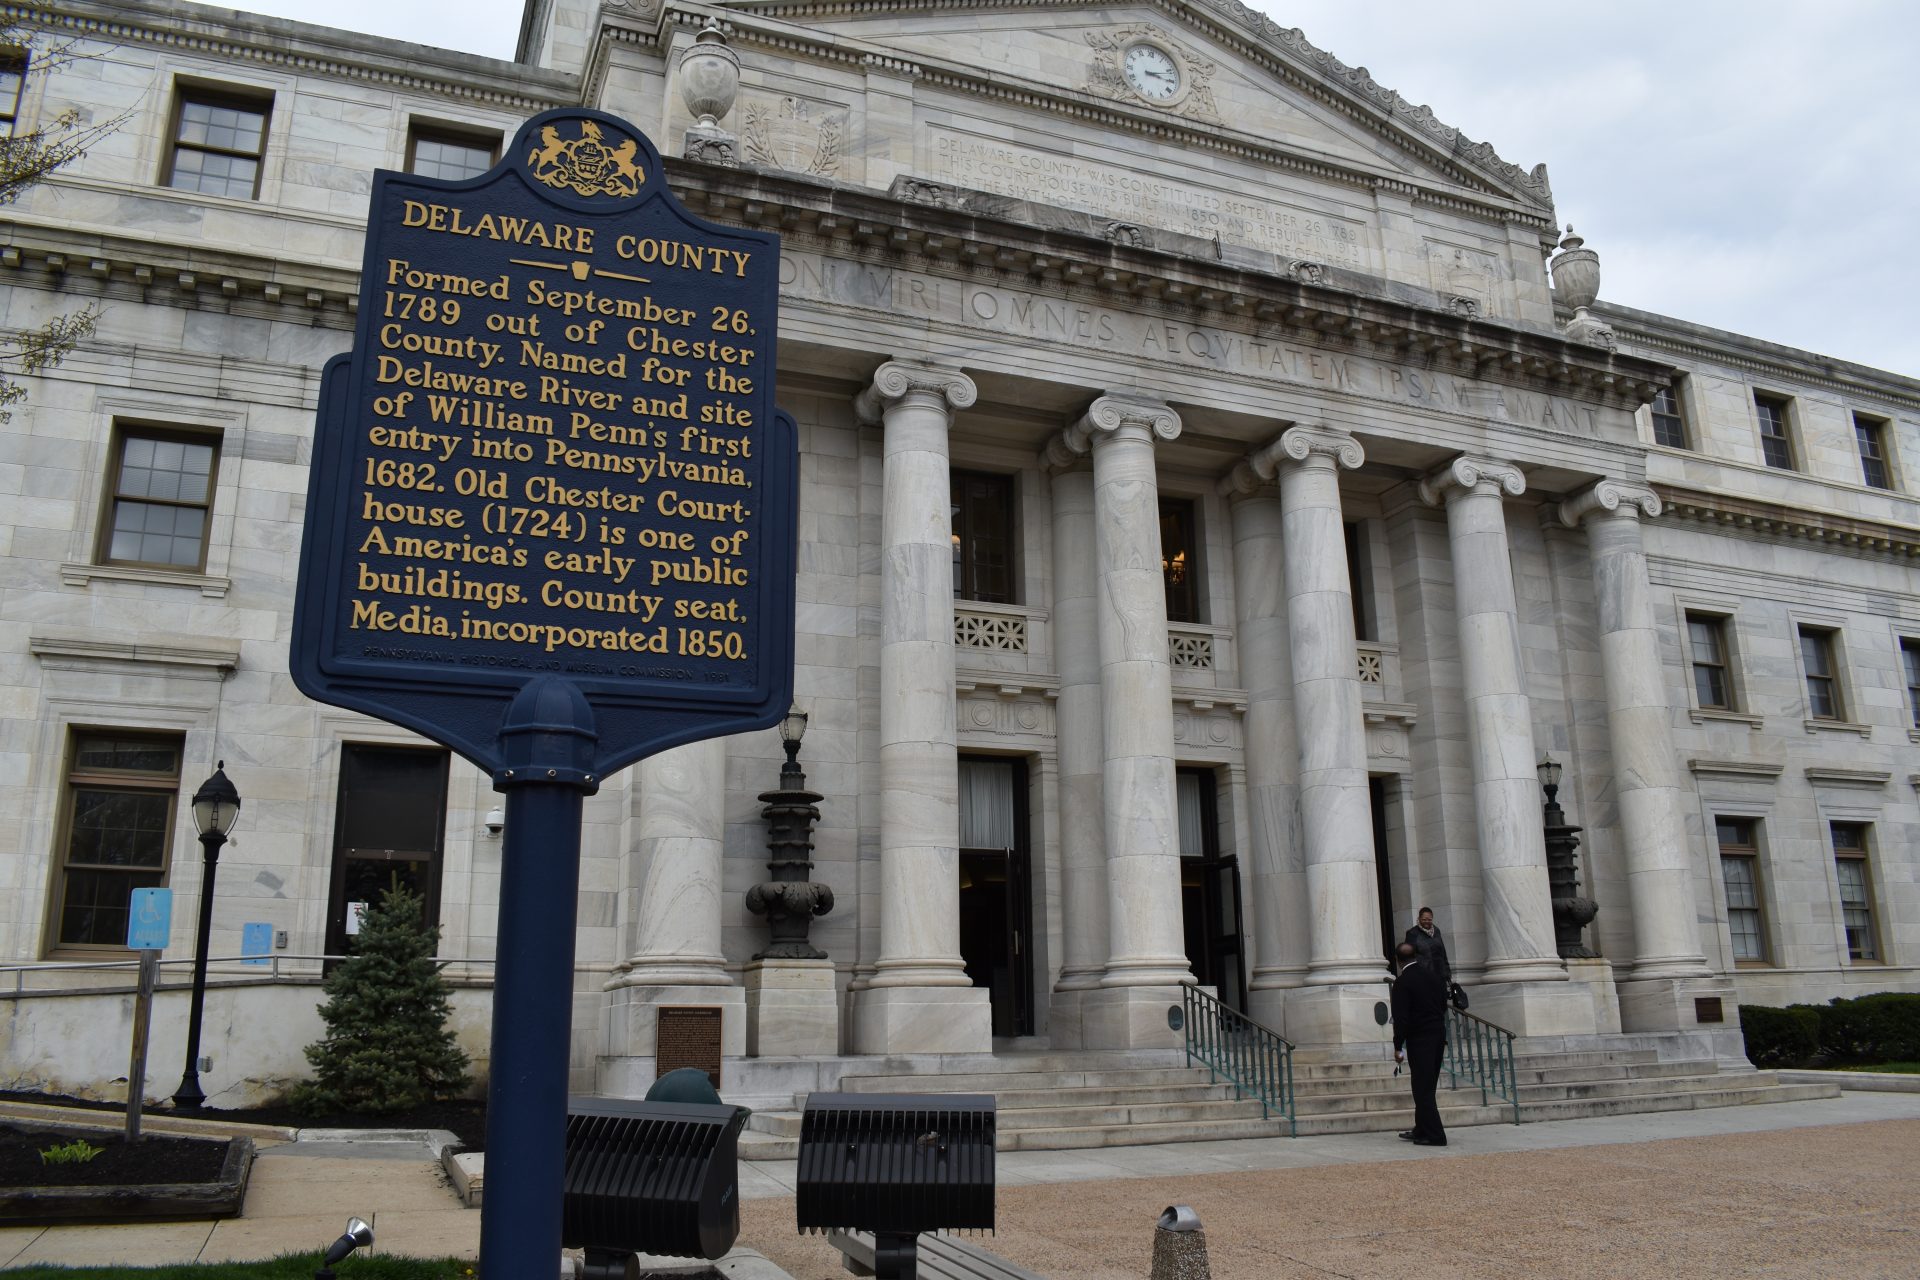 The Delaware County courthouse in Media, Pennsylvania, is seen on April 11, 2019.